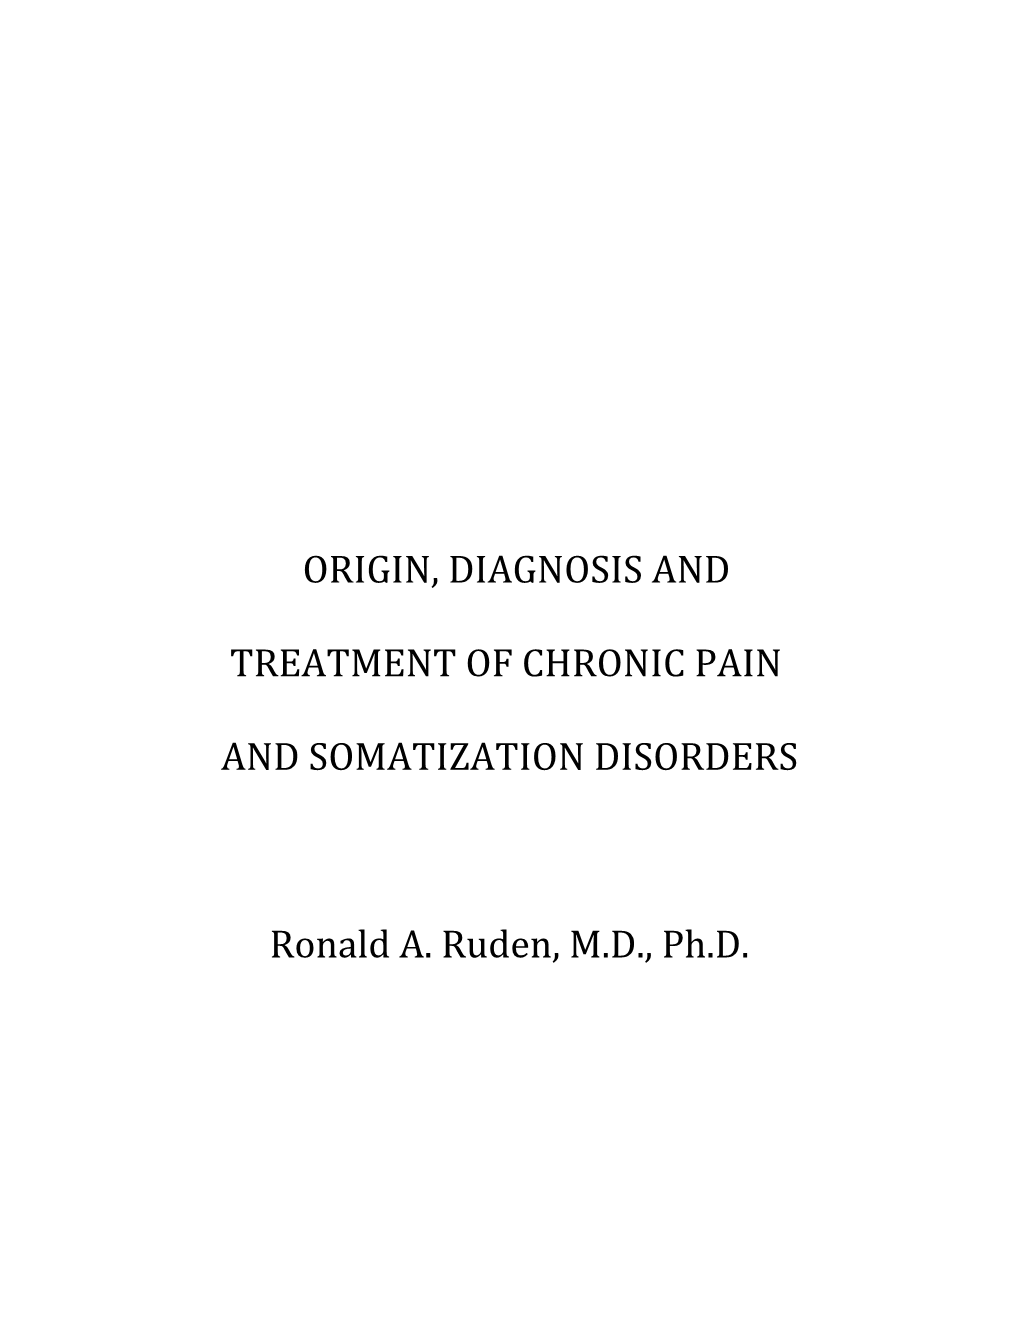 Treatment of Chronic Pain and Somatization Disorders